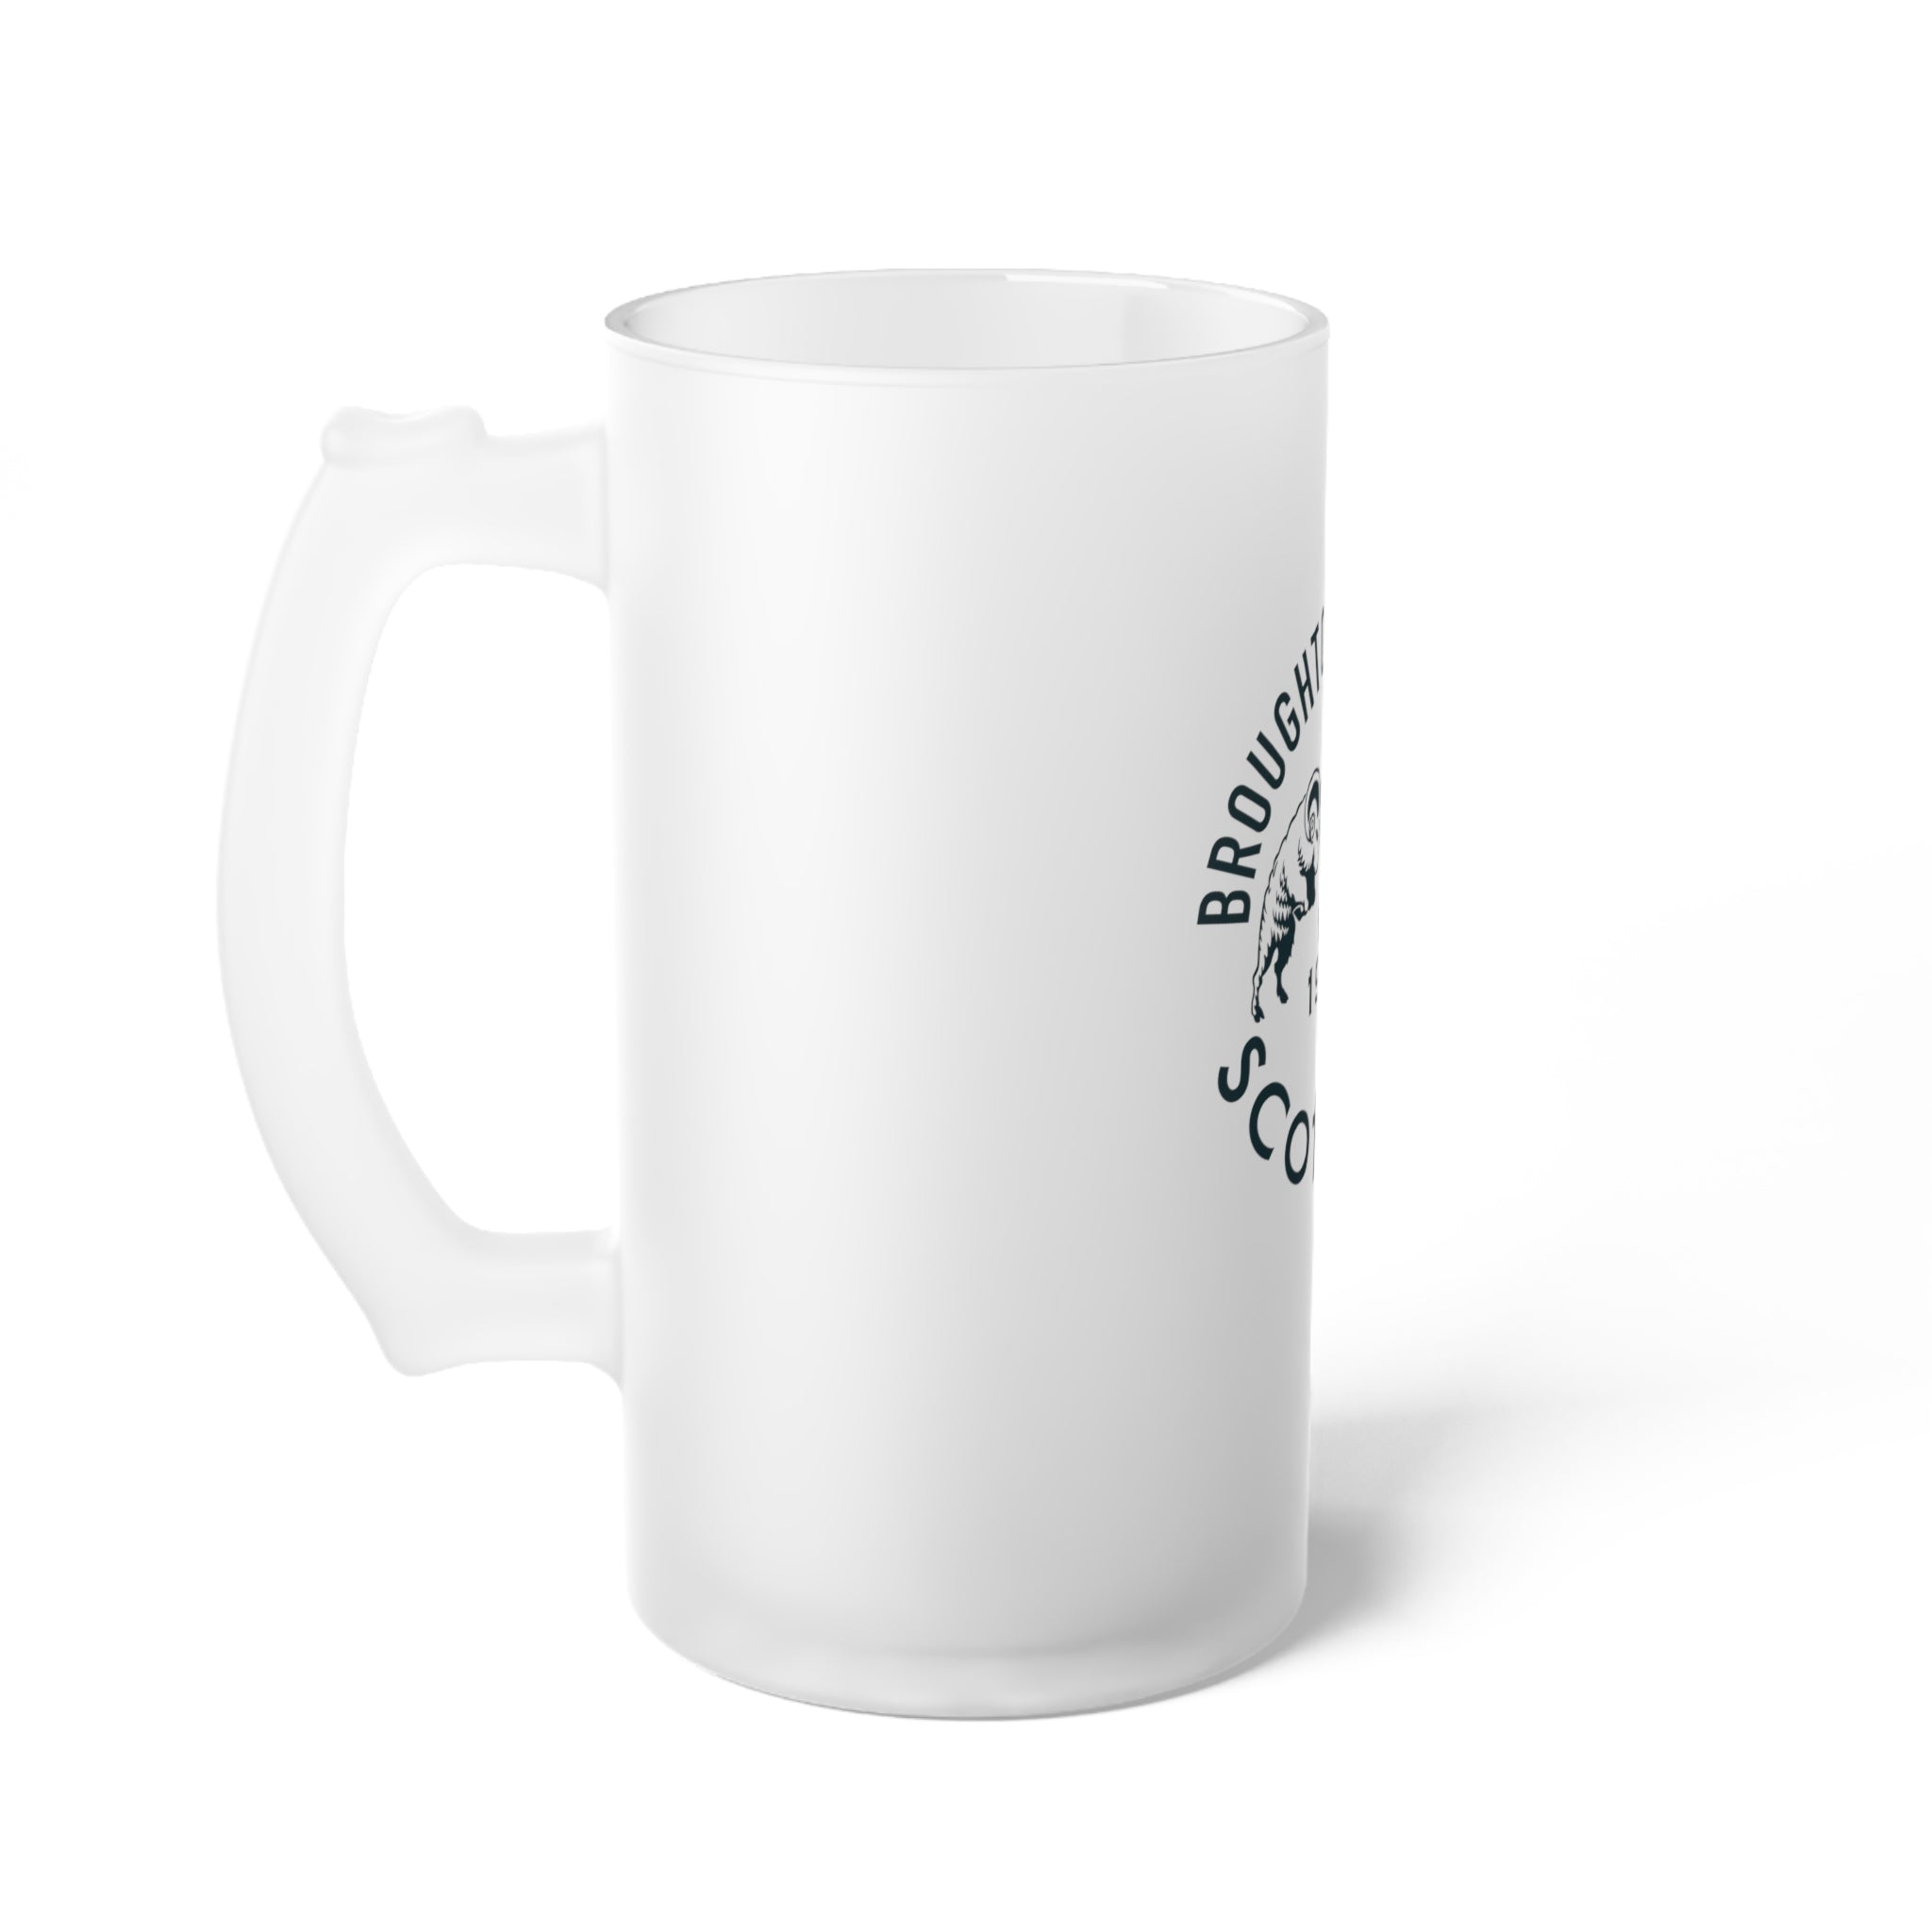 Broughton Ales Frosted Glass Beer Mug